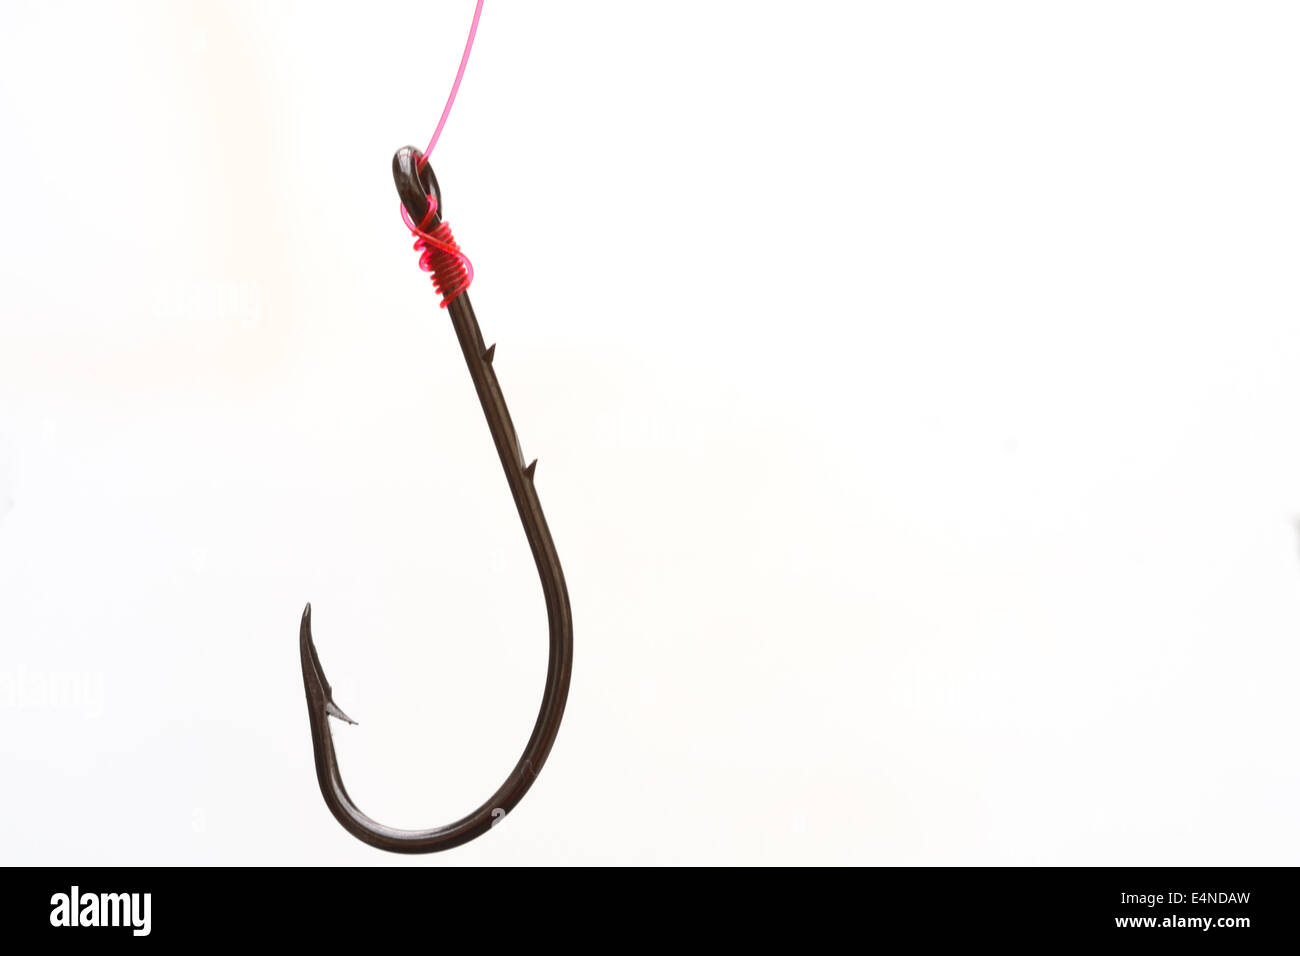 Fish Hook with Red Line Stock Photo